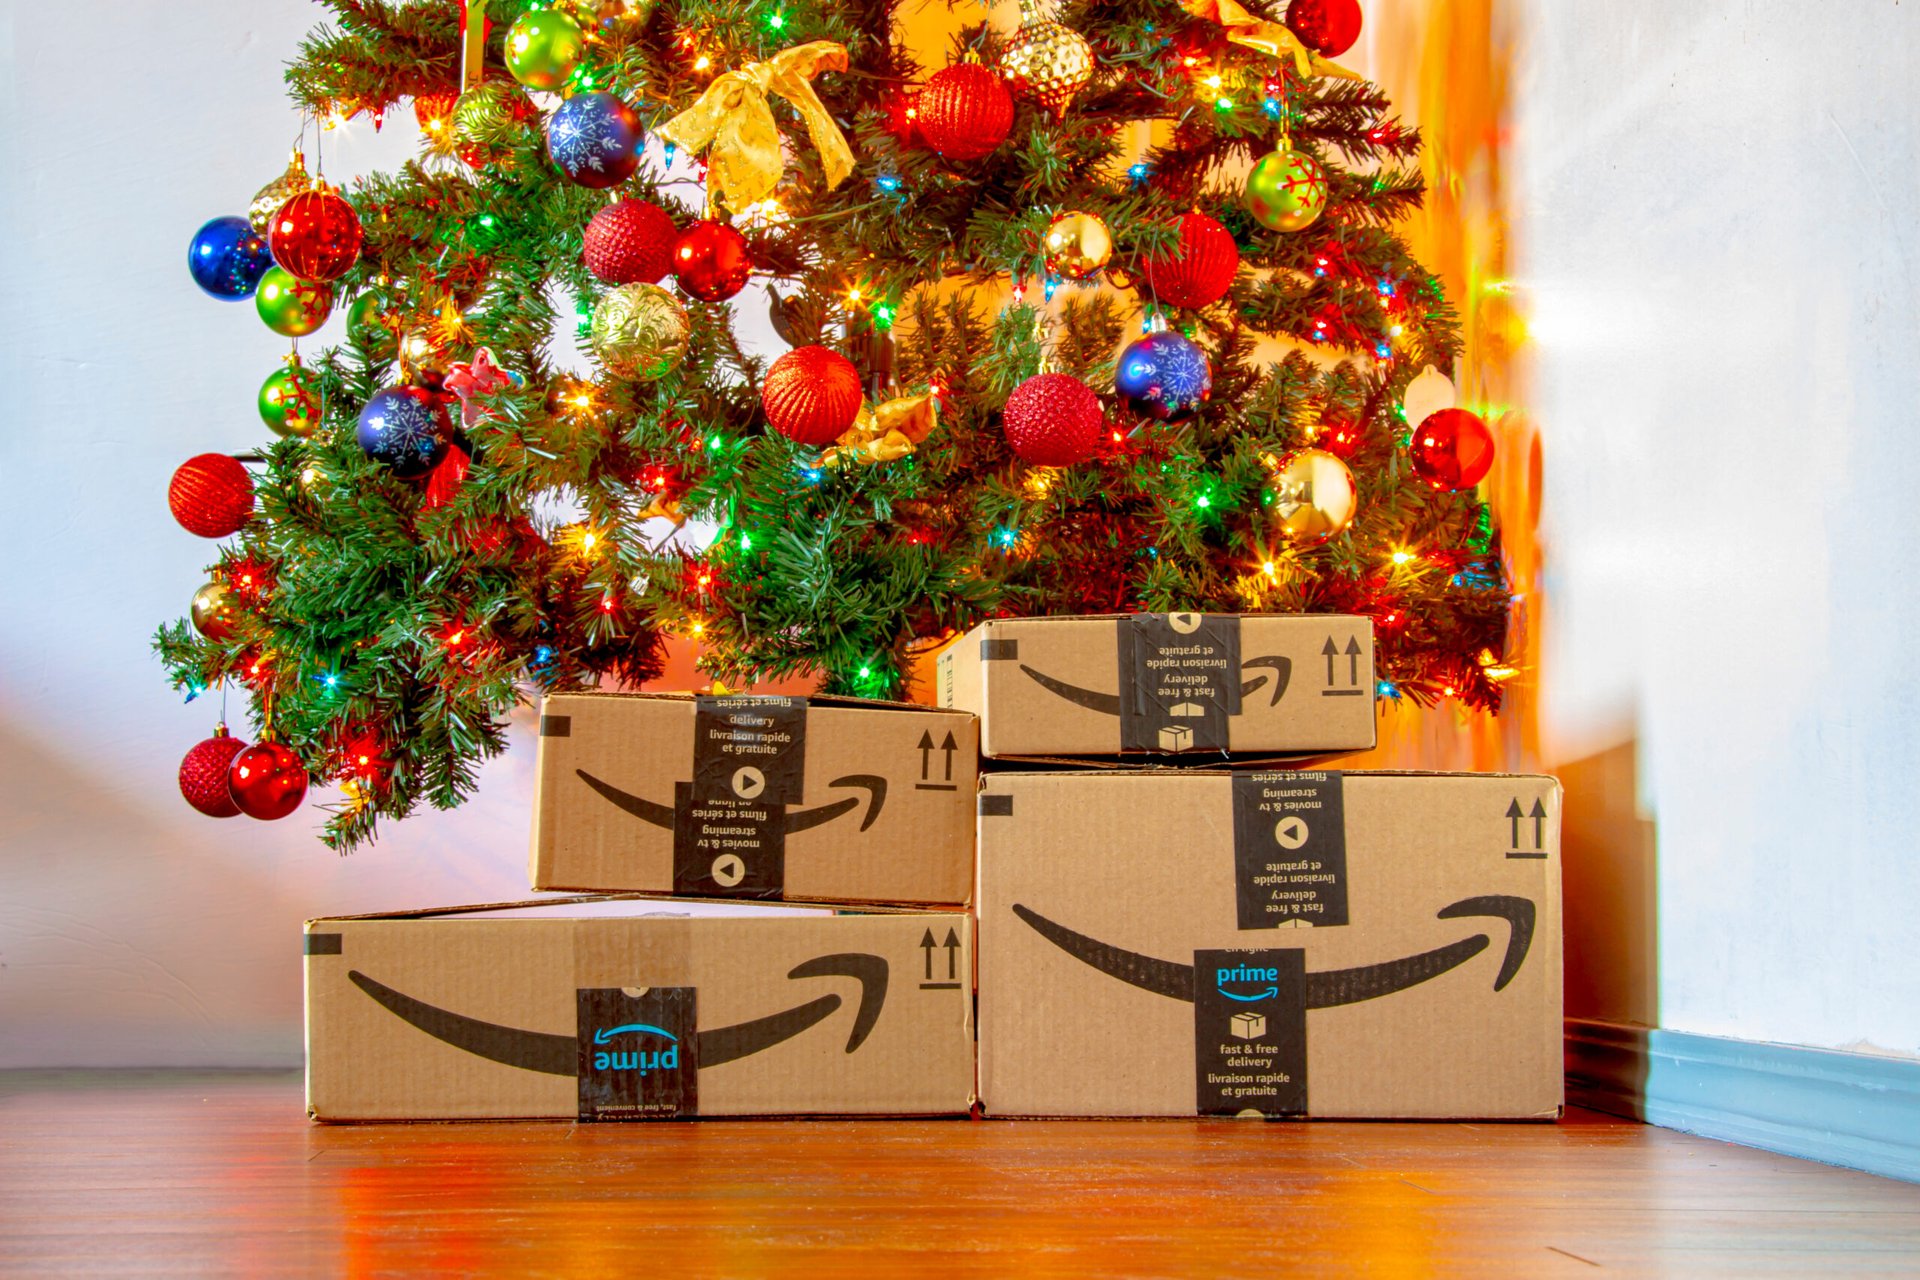 Amazon boxes under a Christmas tree